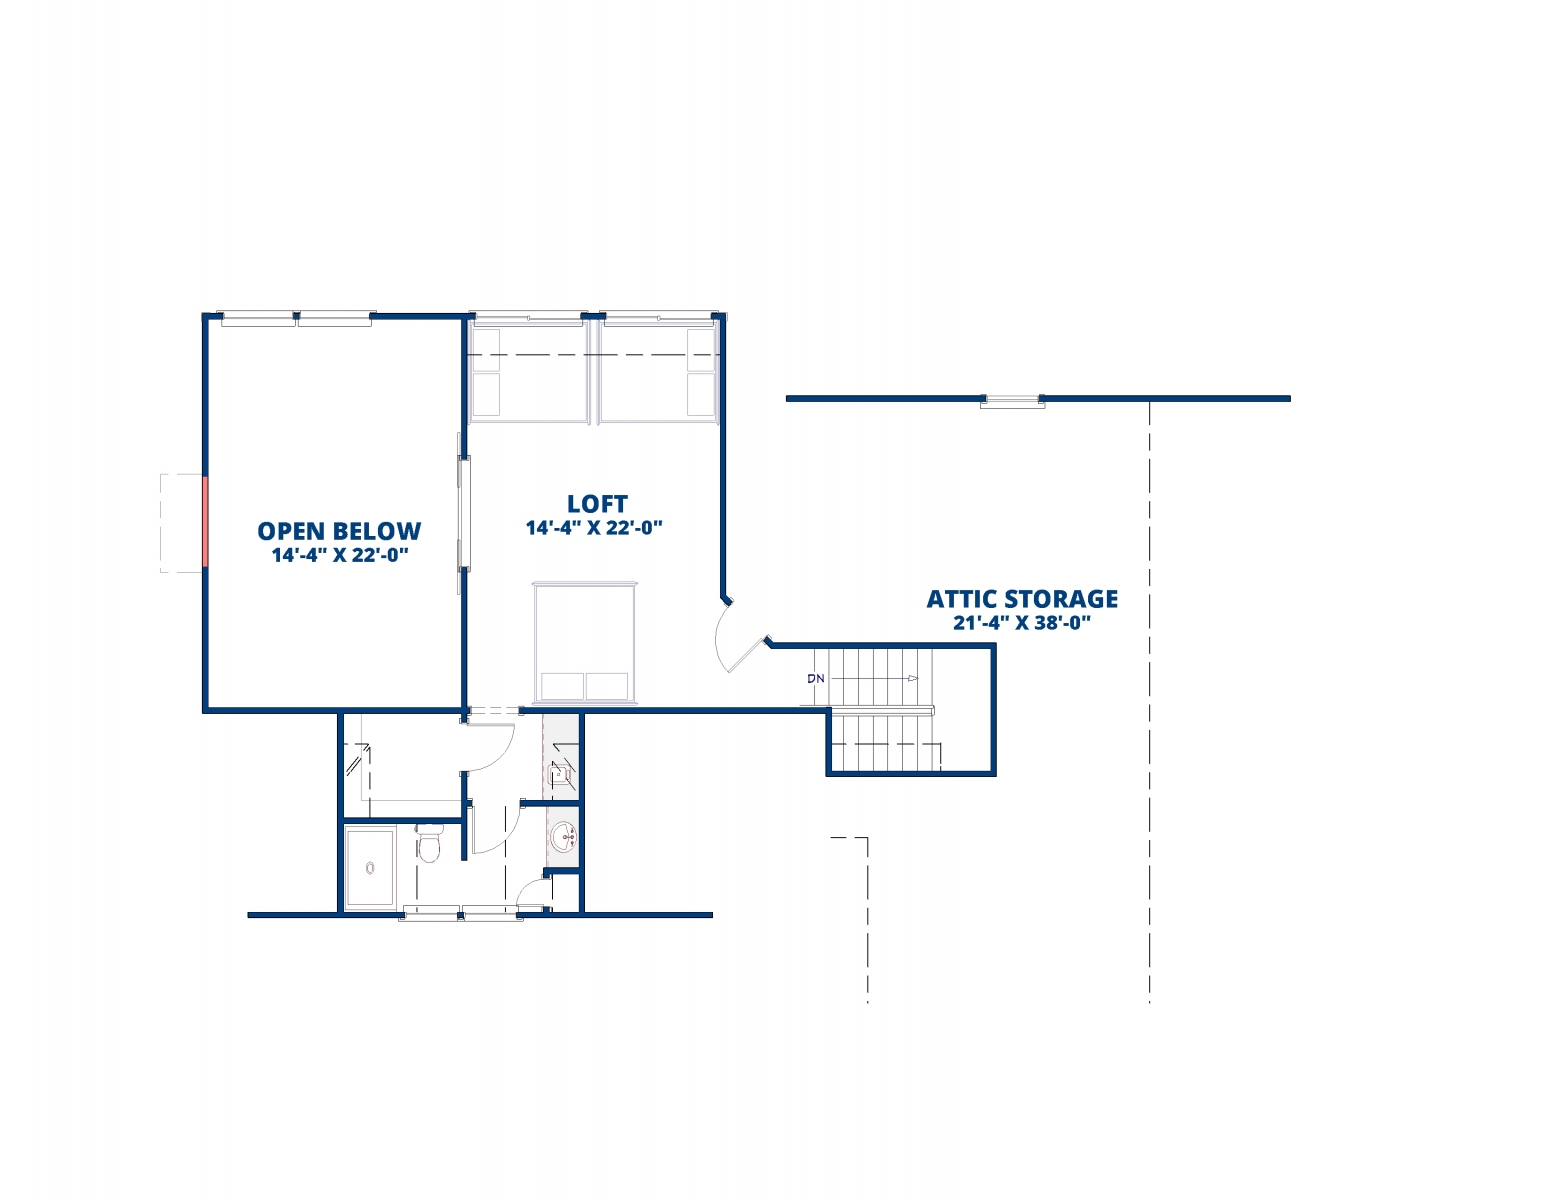 Second floor layout of a farmhouse with loft suite designed in Chief Architect.